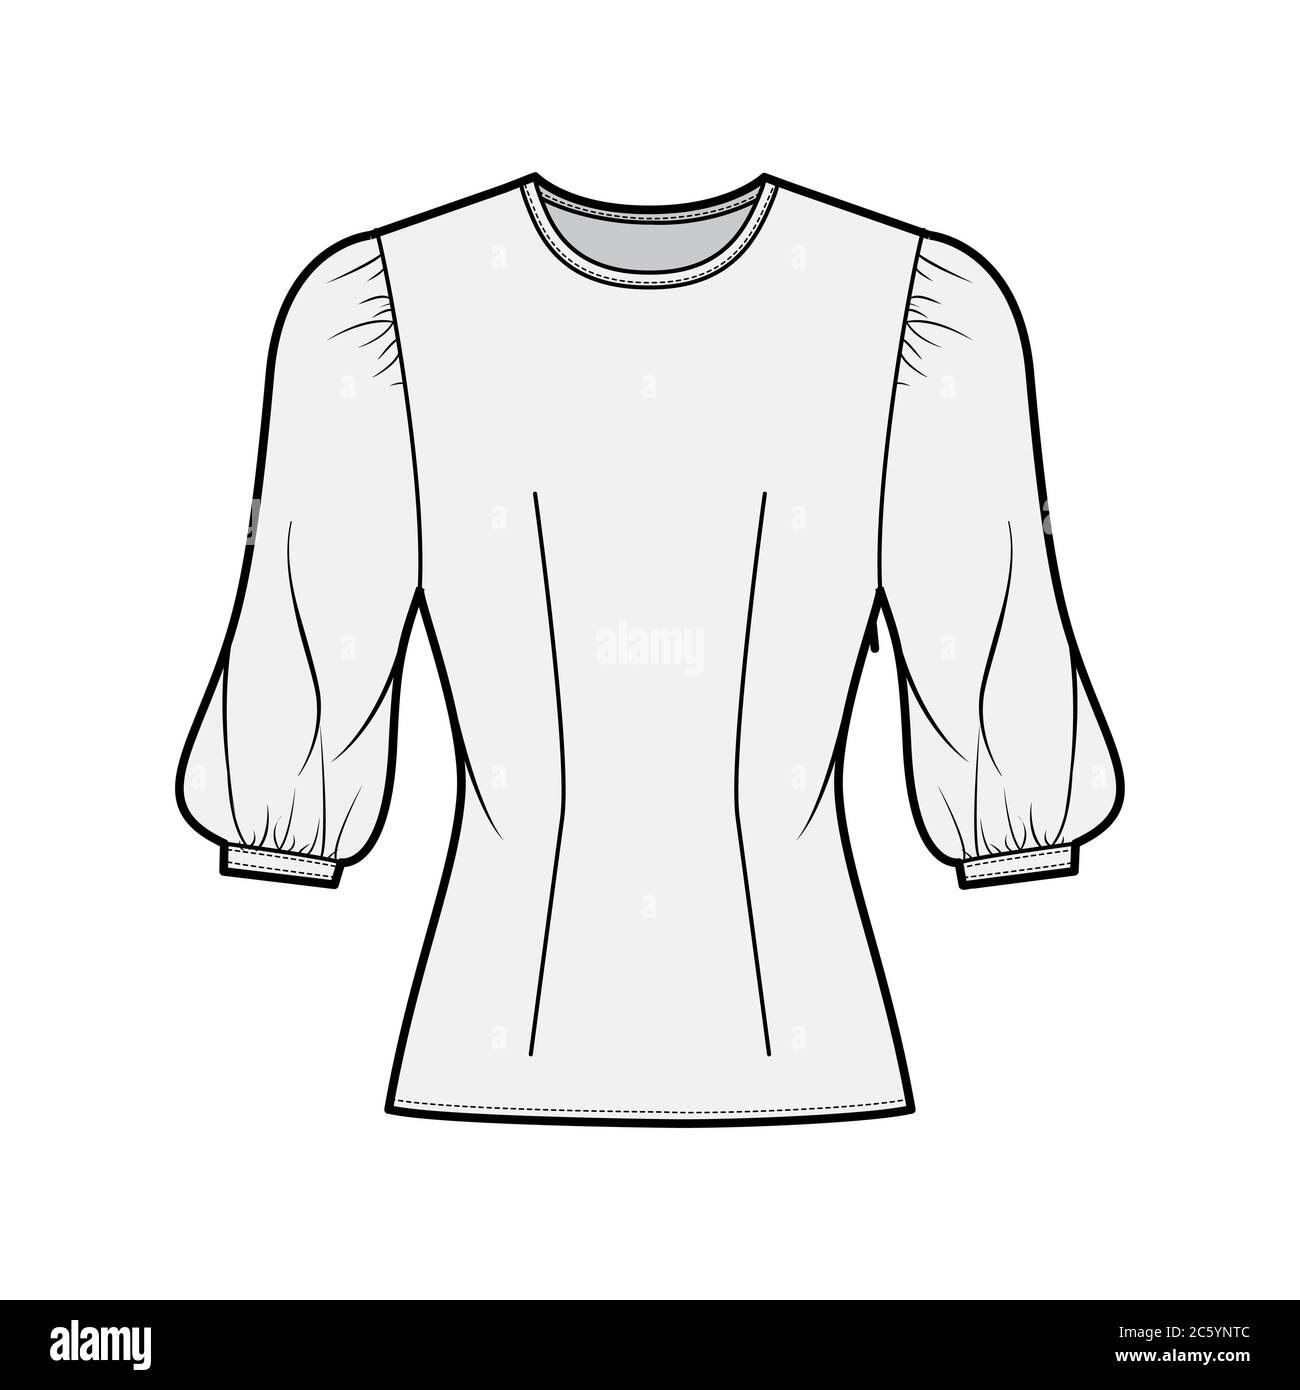 Blouse technical fashion illustration with round neckline, puffy mutton sleeves, fitted body, side zip fastening. Flat apparel template front grey color. Women, men unisex CAD garment designer mockup Stock Vector